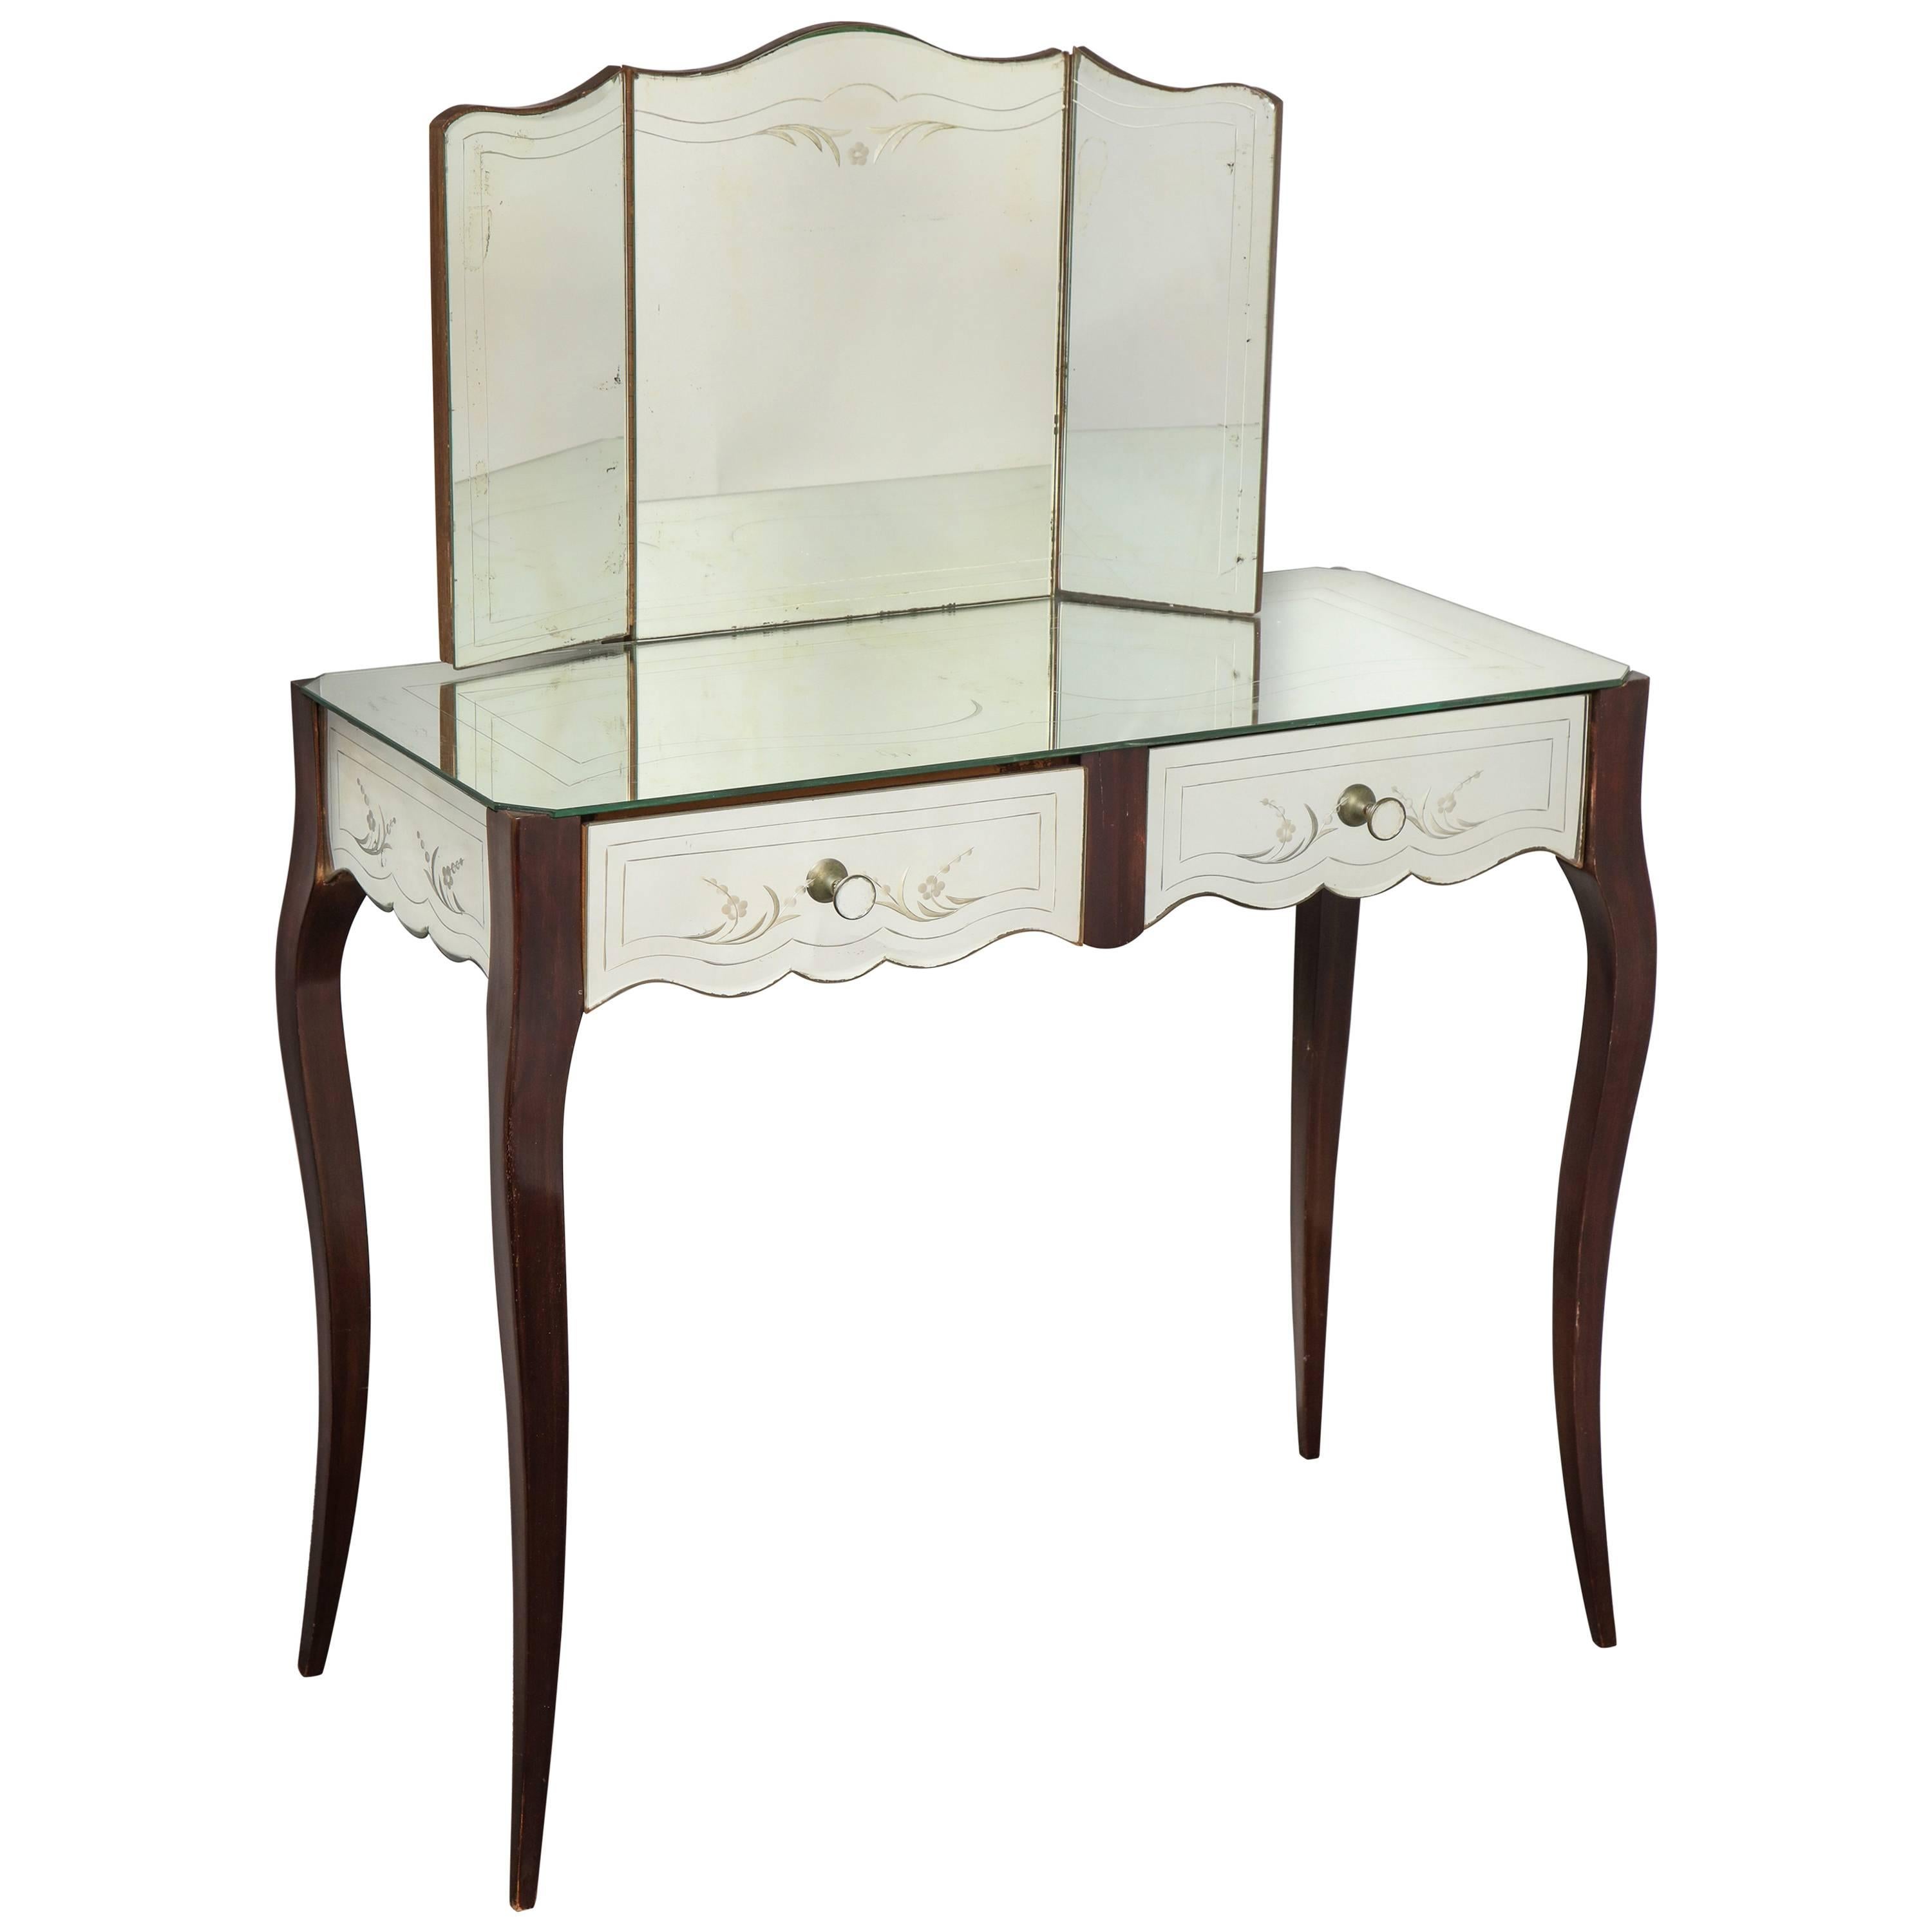 French Deco Mirrored Two-Drawer Vanity with Trifold Mirror